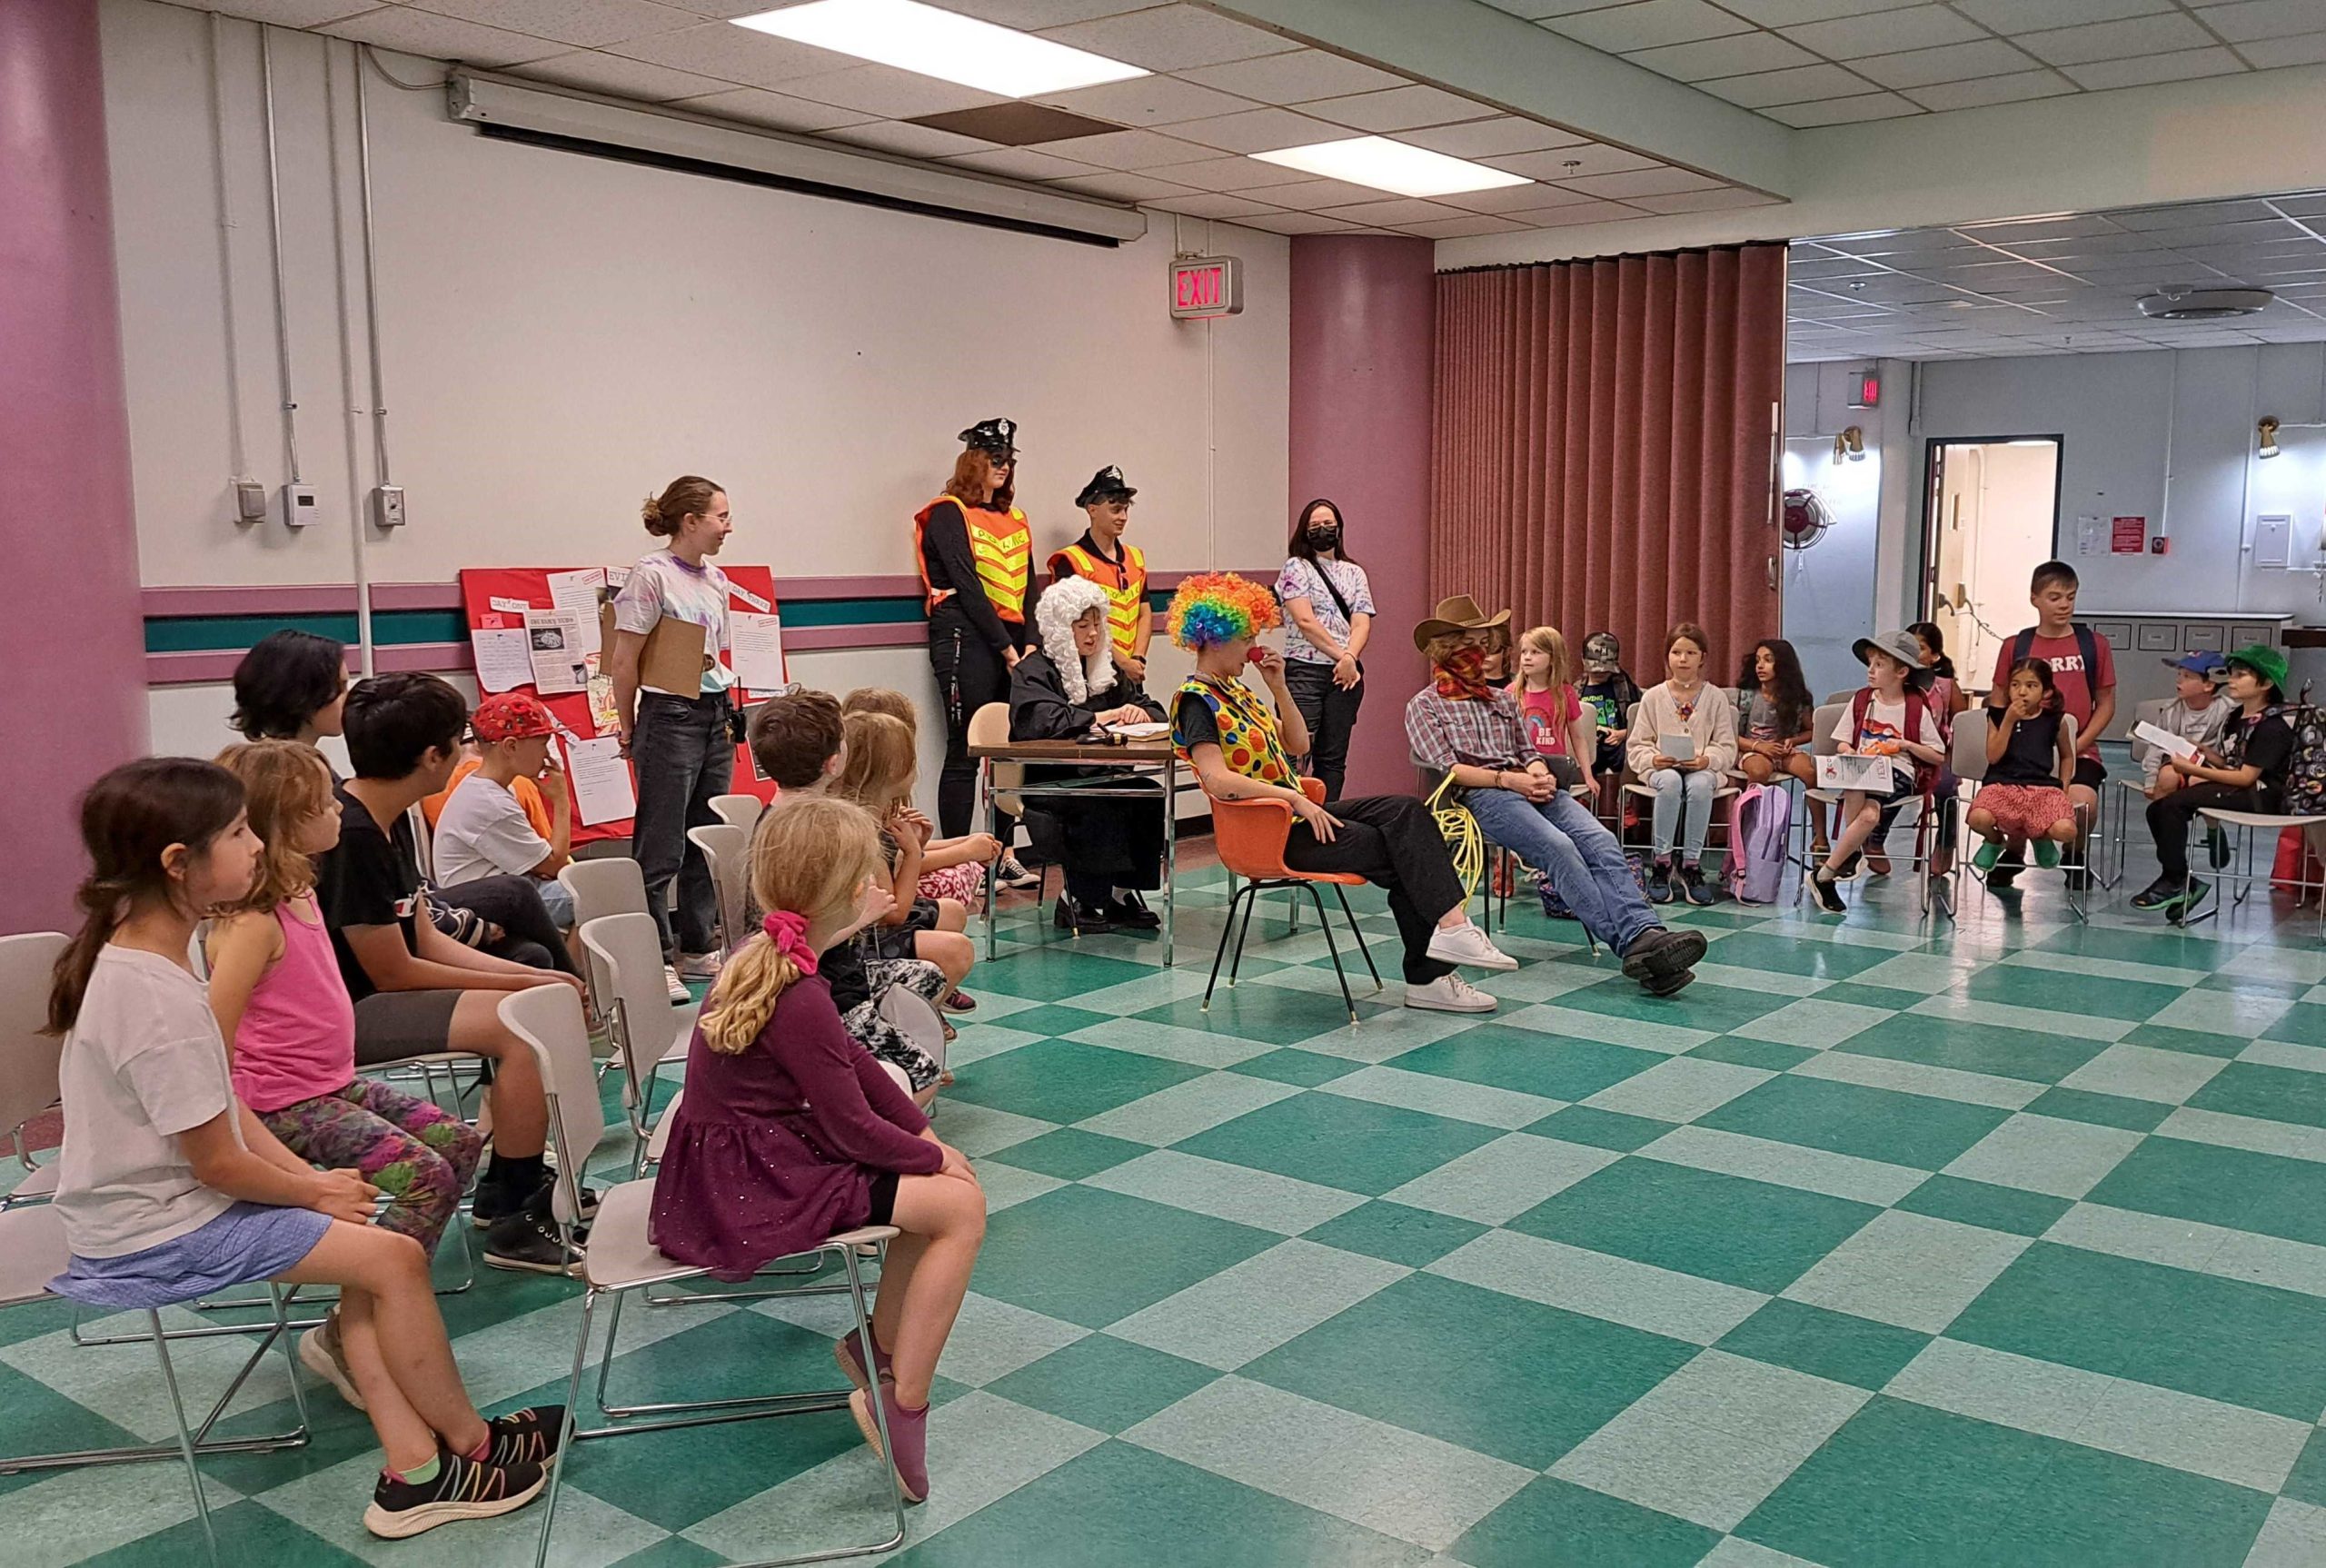 Spy campers gather for trial in the Diefenbunker's Cafeteria. 